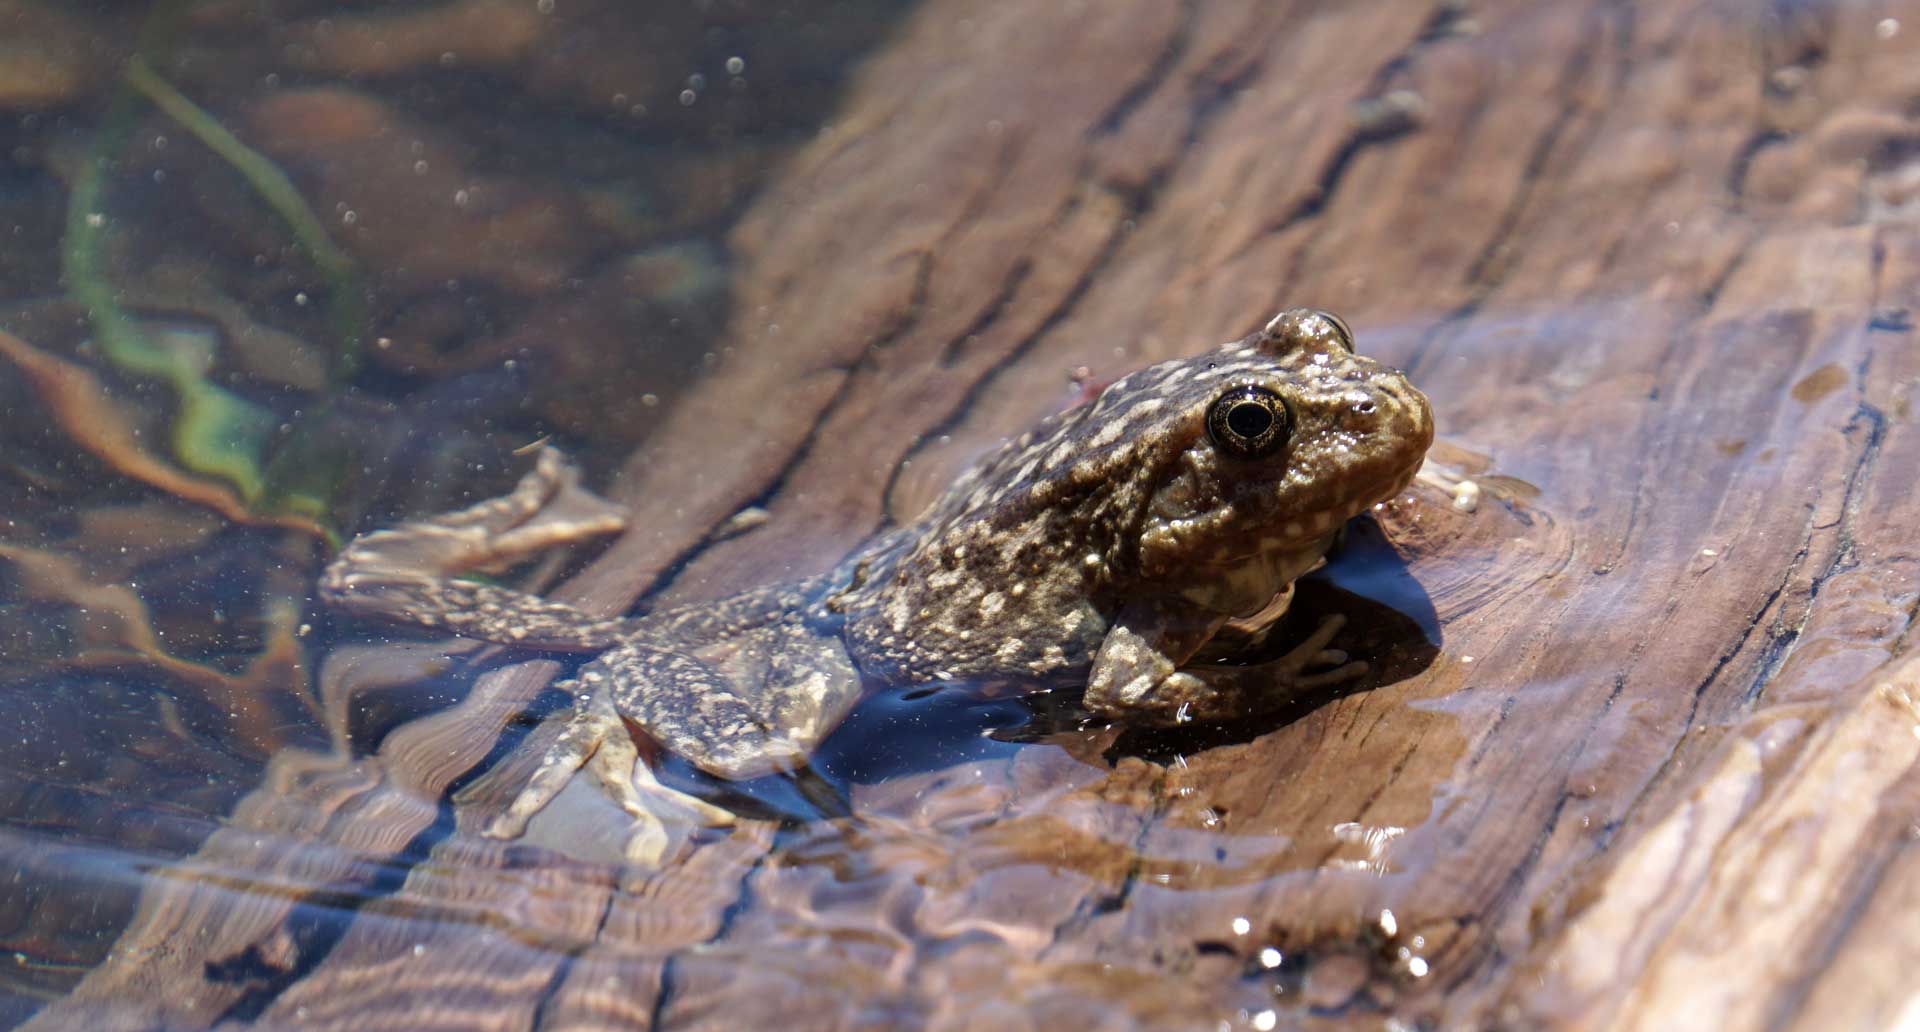 Mountain yellow-legged frog populations have declined by more than 90 percent.